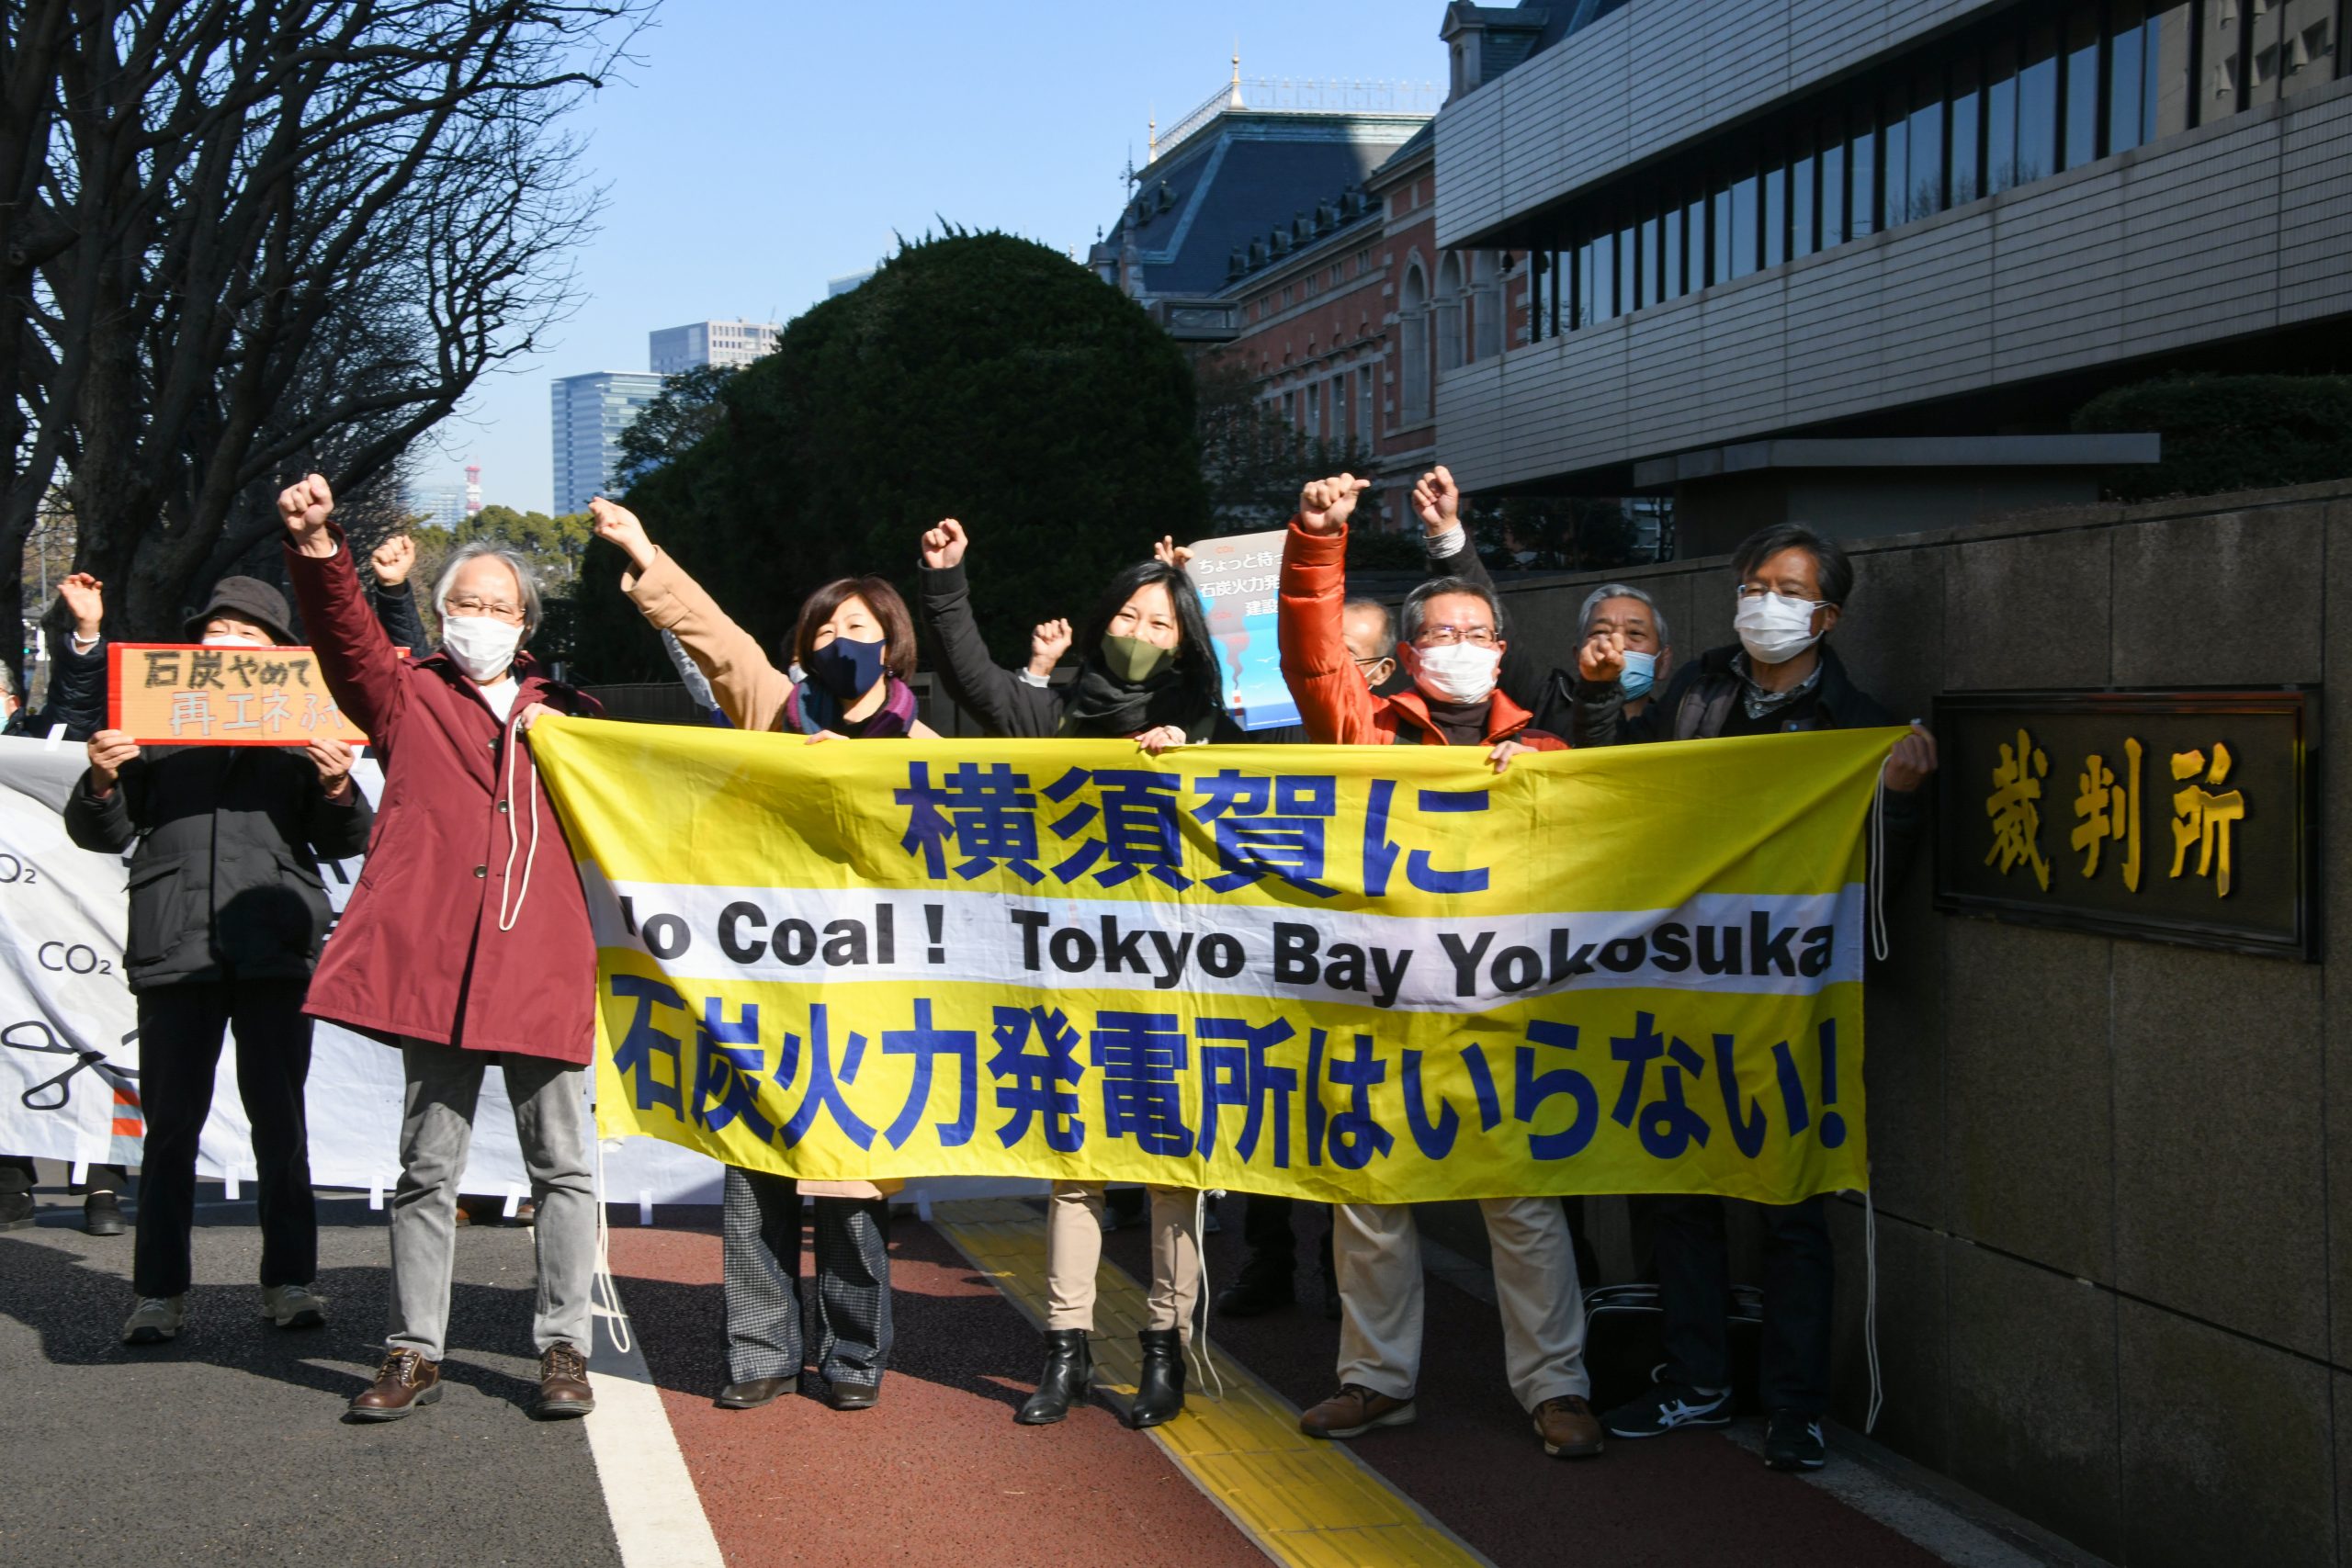 A group of people protesting against coal power wearing face-masks march on a street and raising their right fists in the air hold various signs including a yellow banner in Japanese and English reading (in English) No Coal ! Tokyo Bay Yokosuka Protest